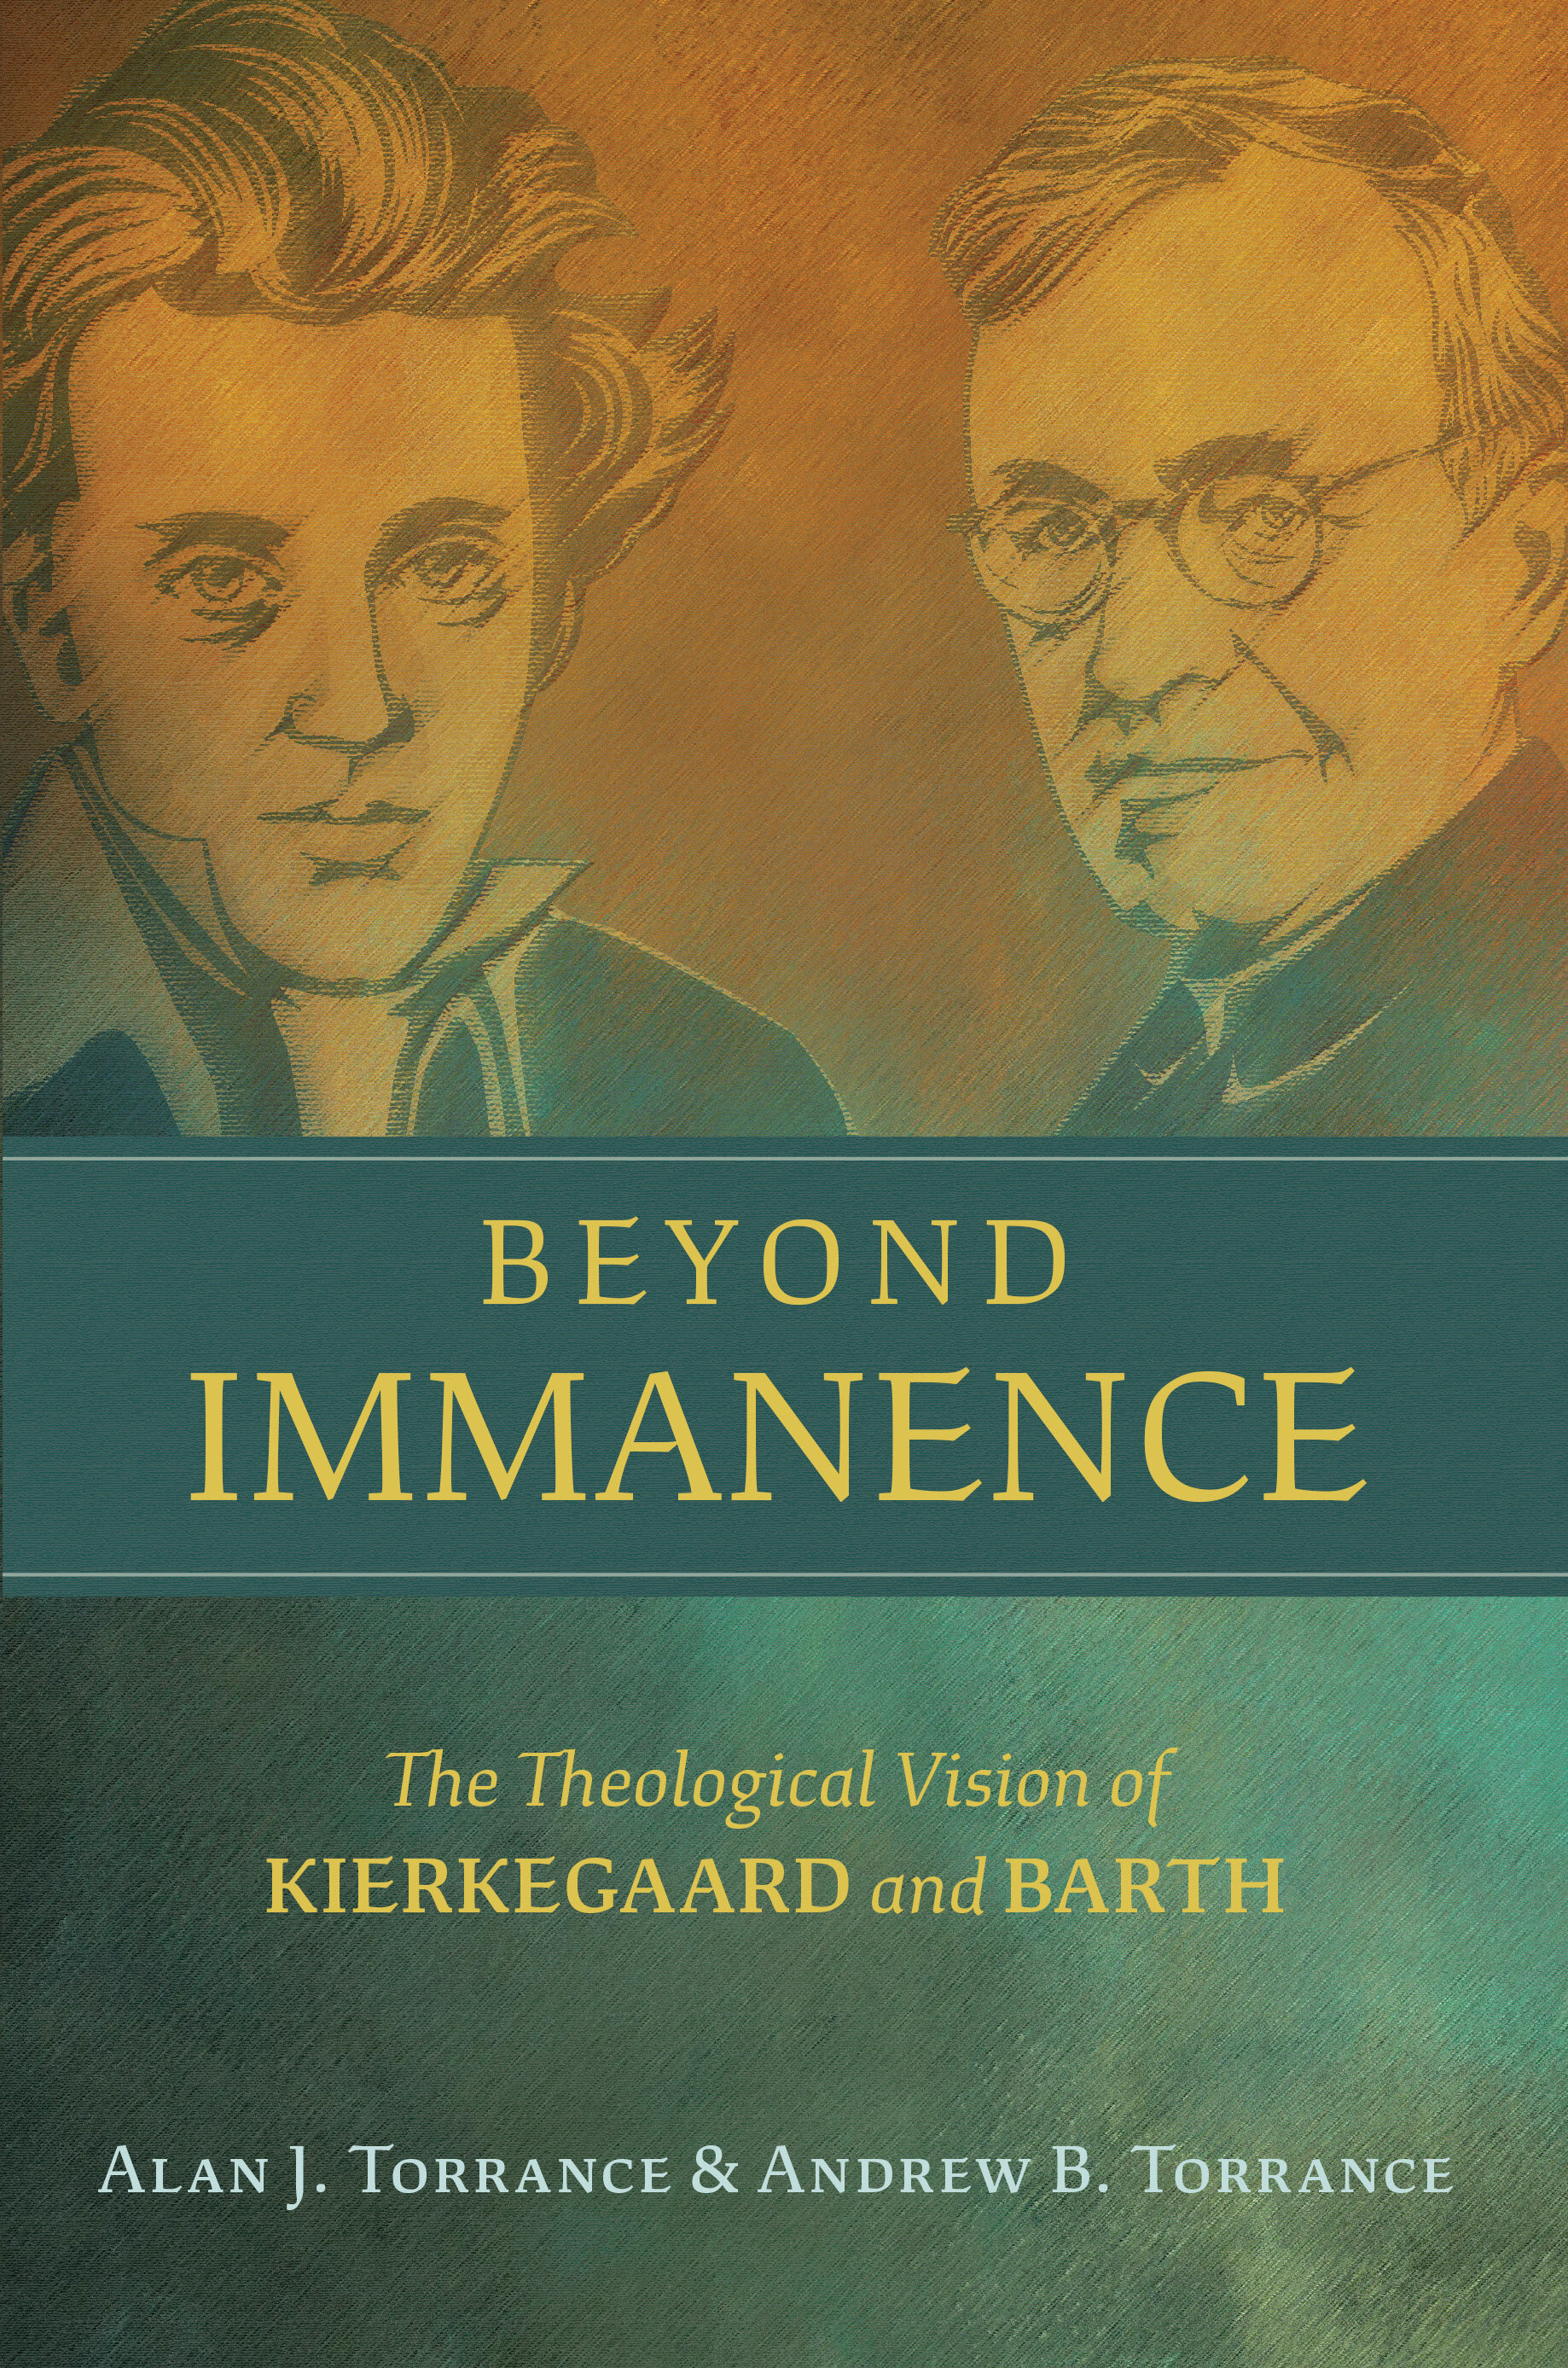 Beyond Immanence: The Theological Vision of Kierkegaard and Barth (Kierkegaard as a Christian Thinker)